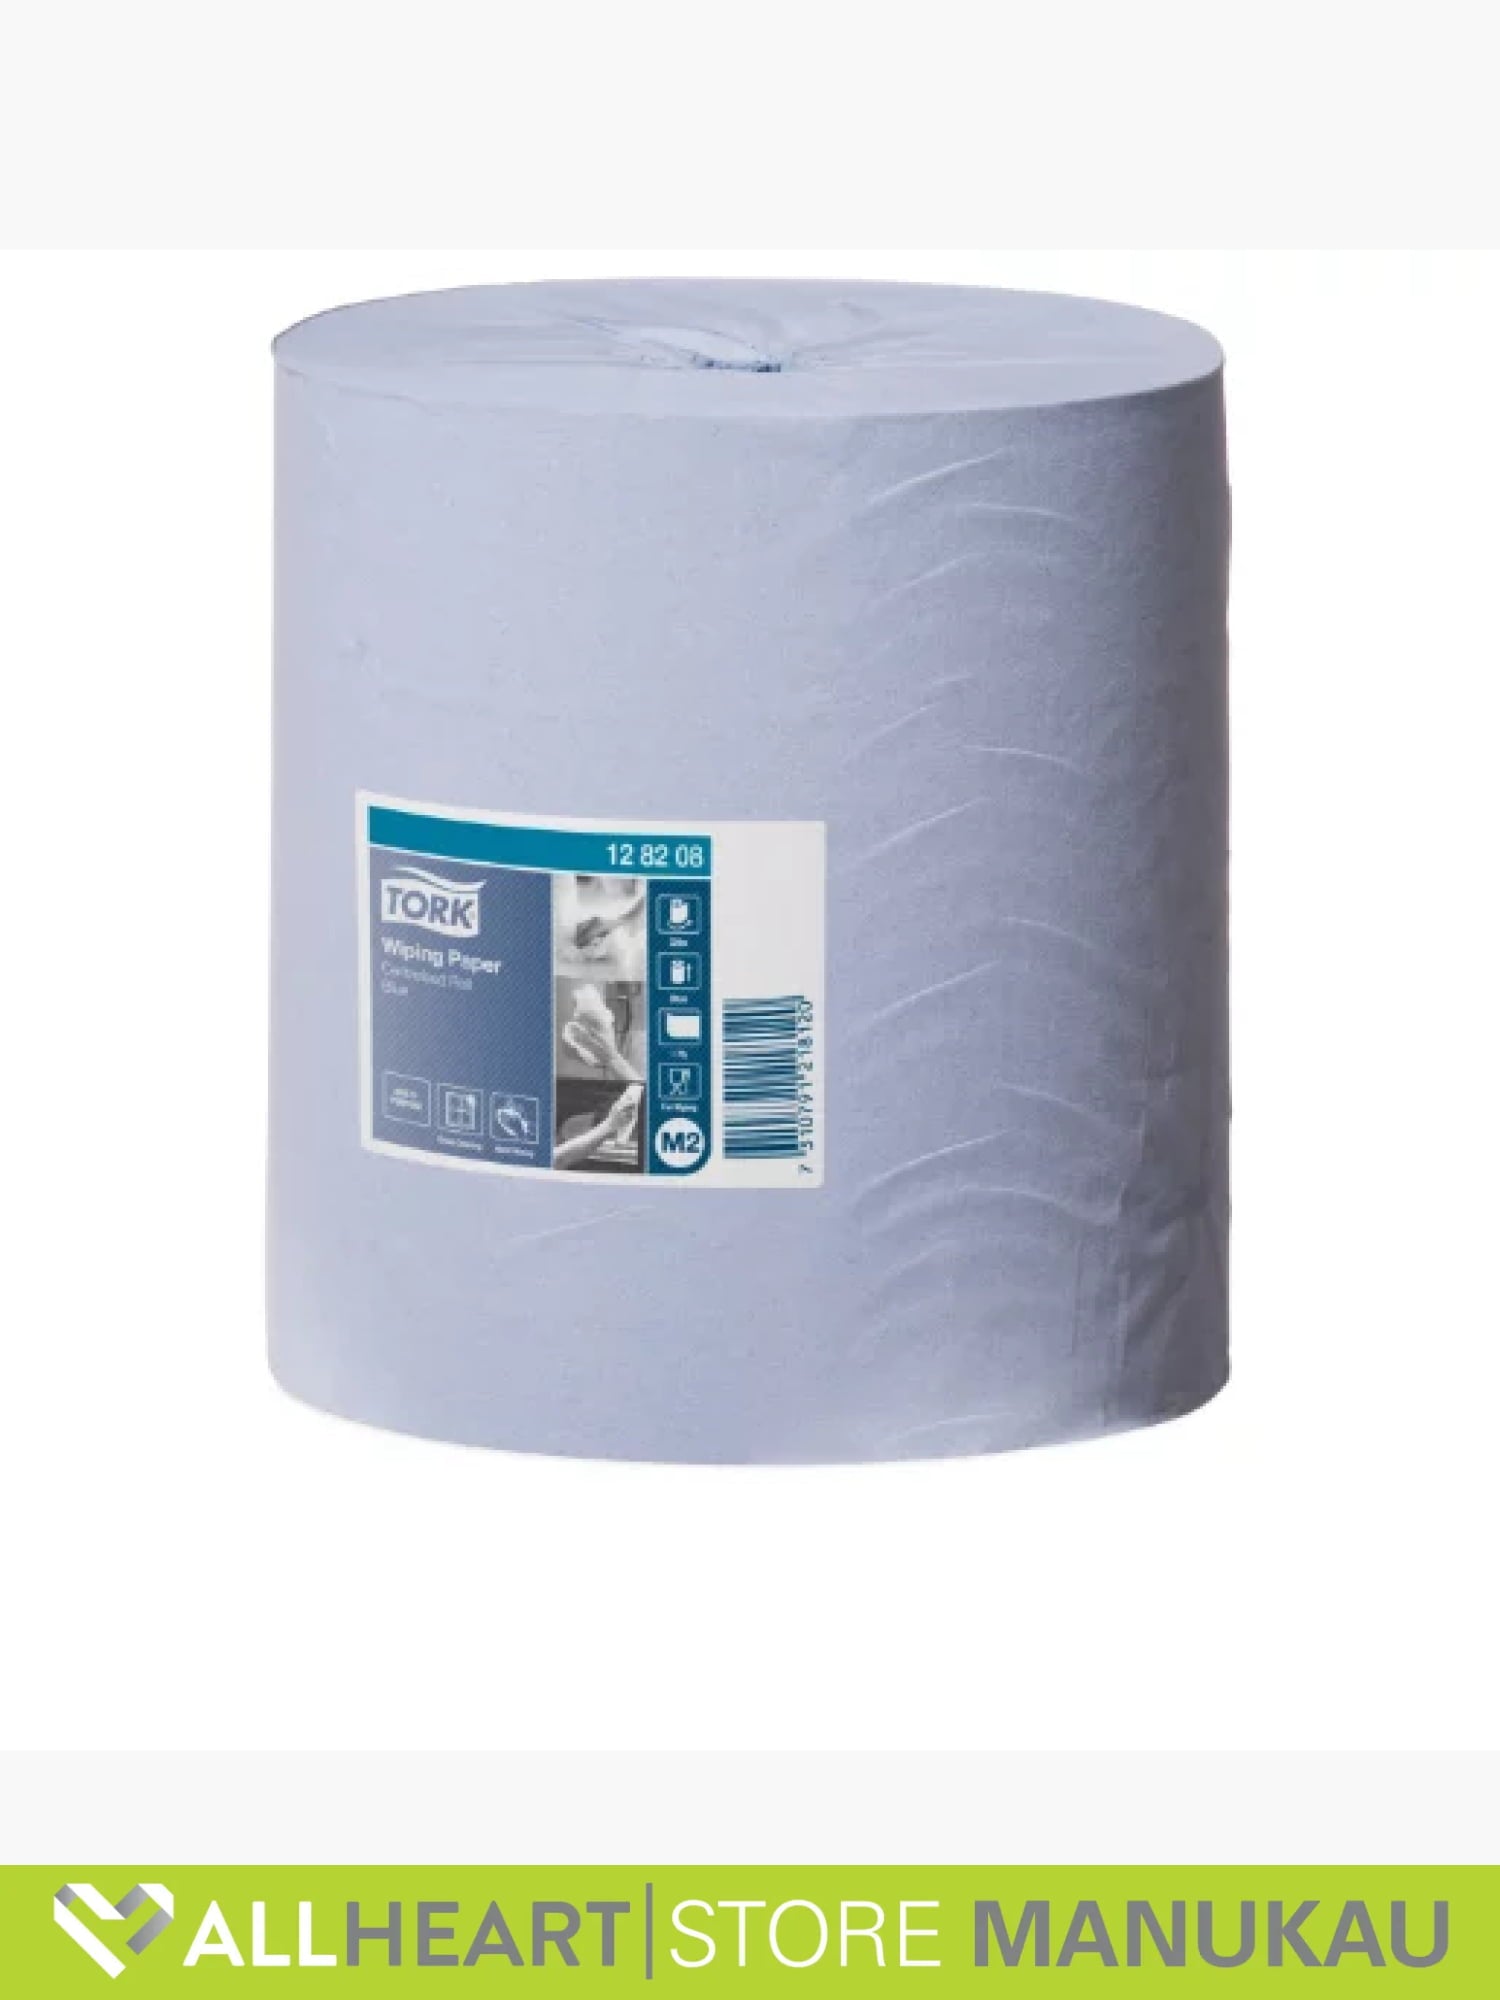 Tork - Wiping Paper - Blue M2 - 12 82 08